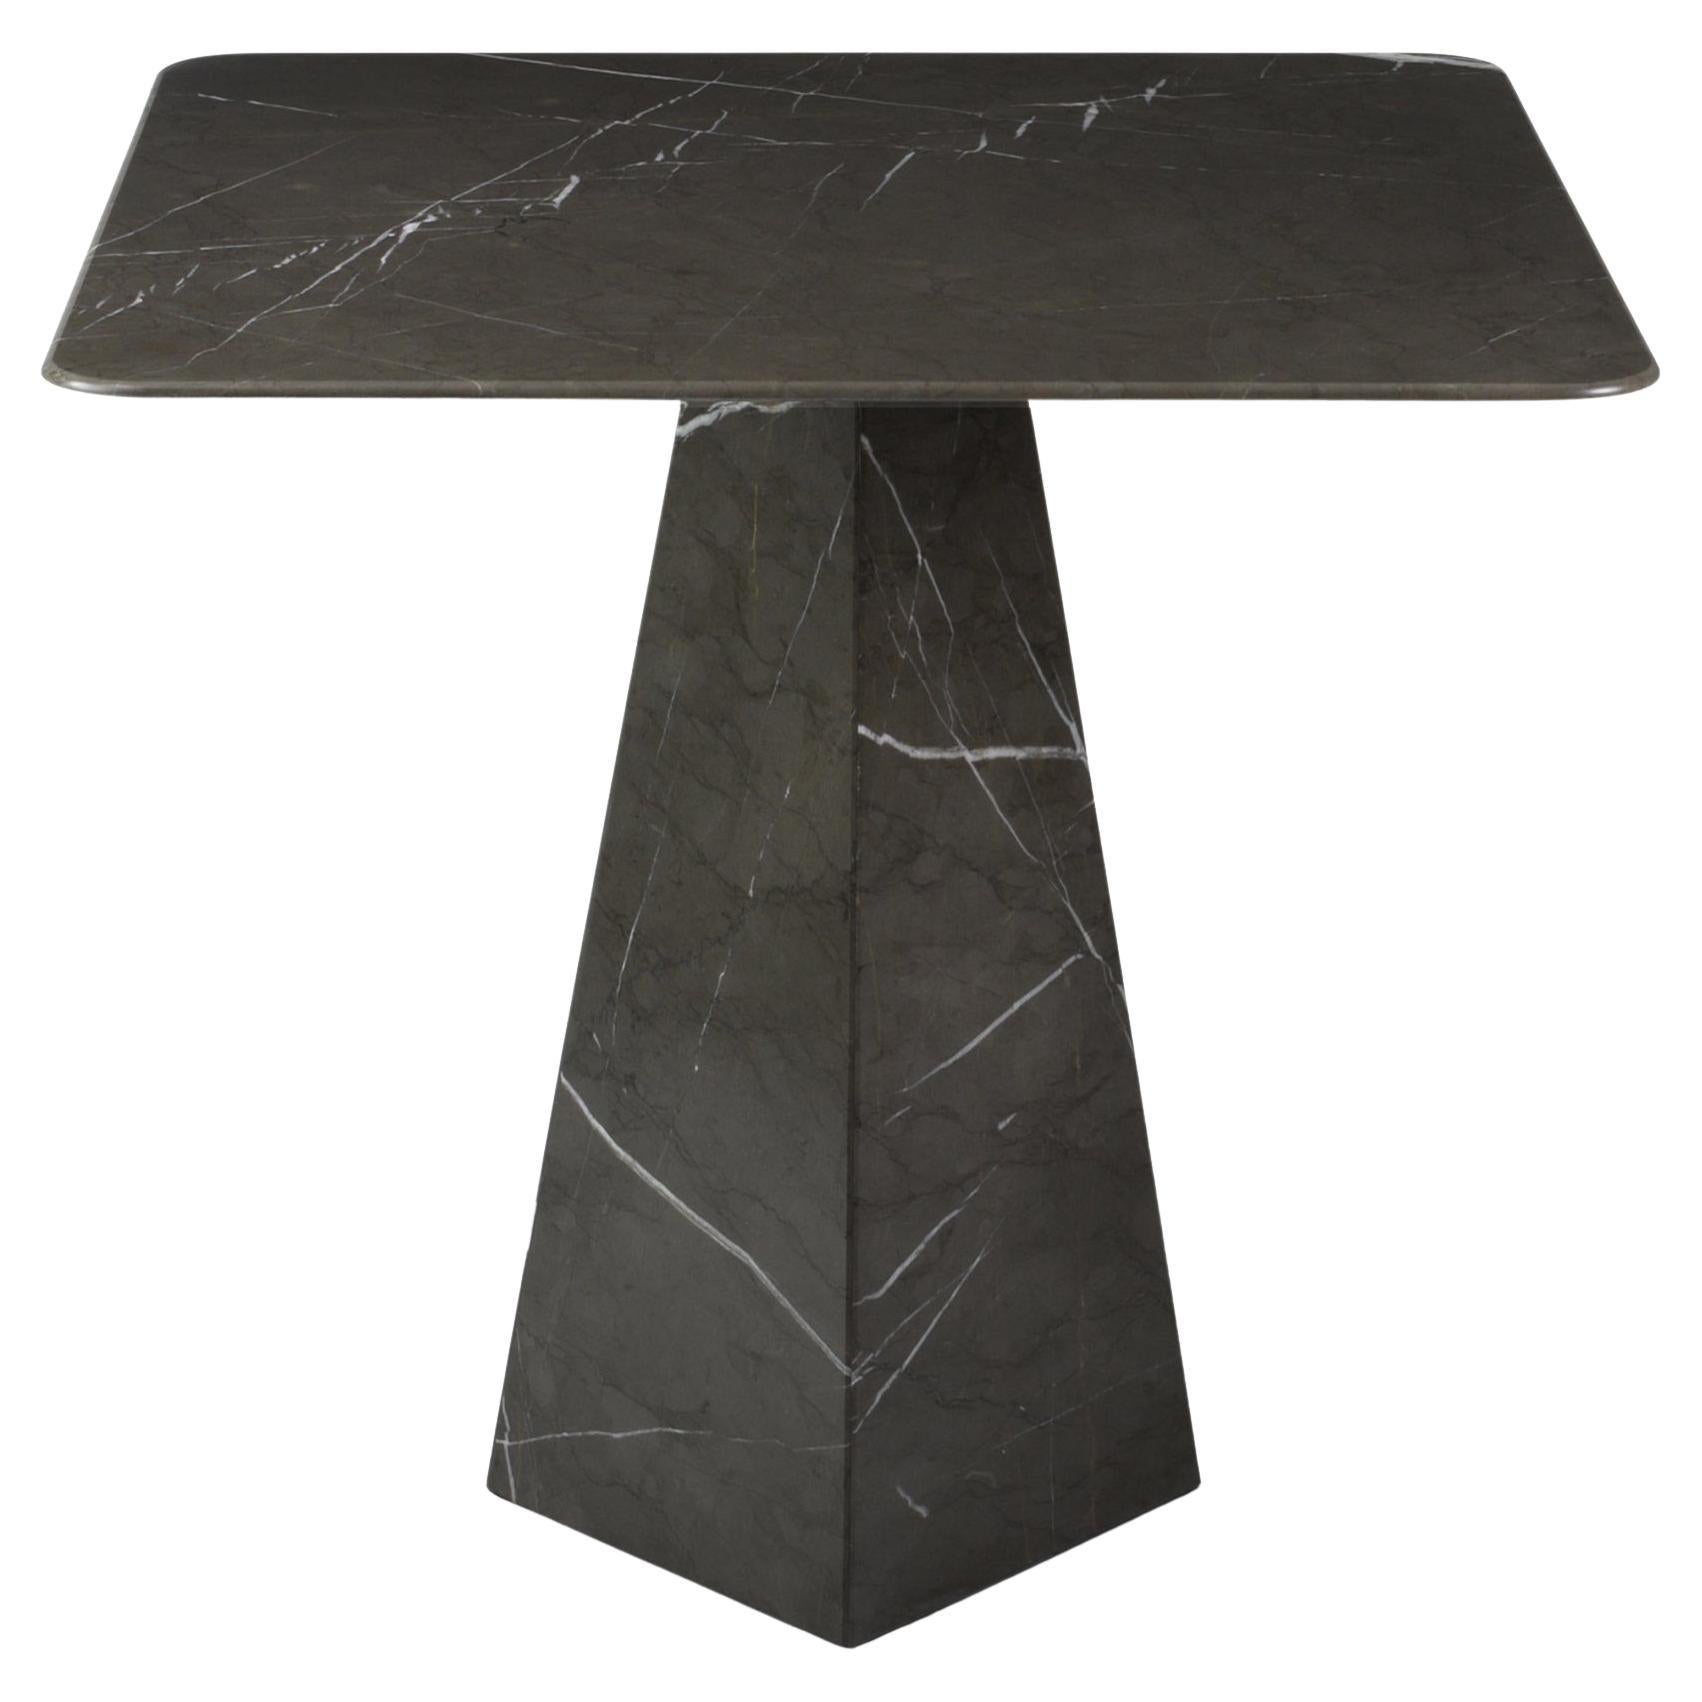 Pair of Ultra Thin Graphite Marble Square Sidetables For Sale